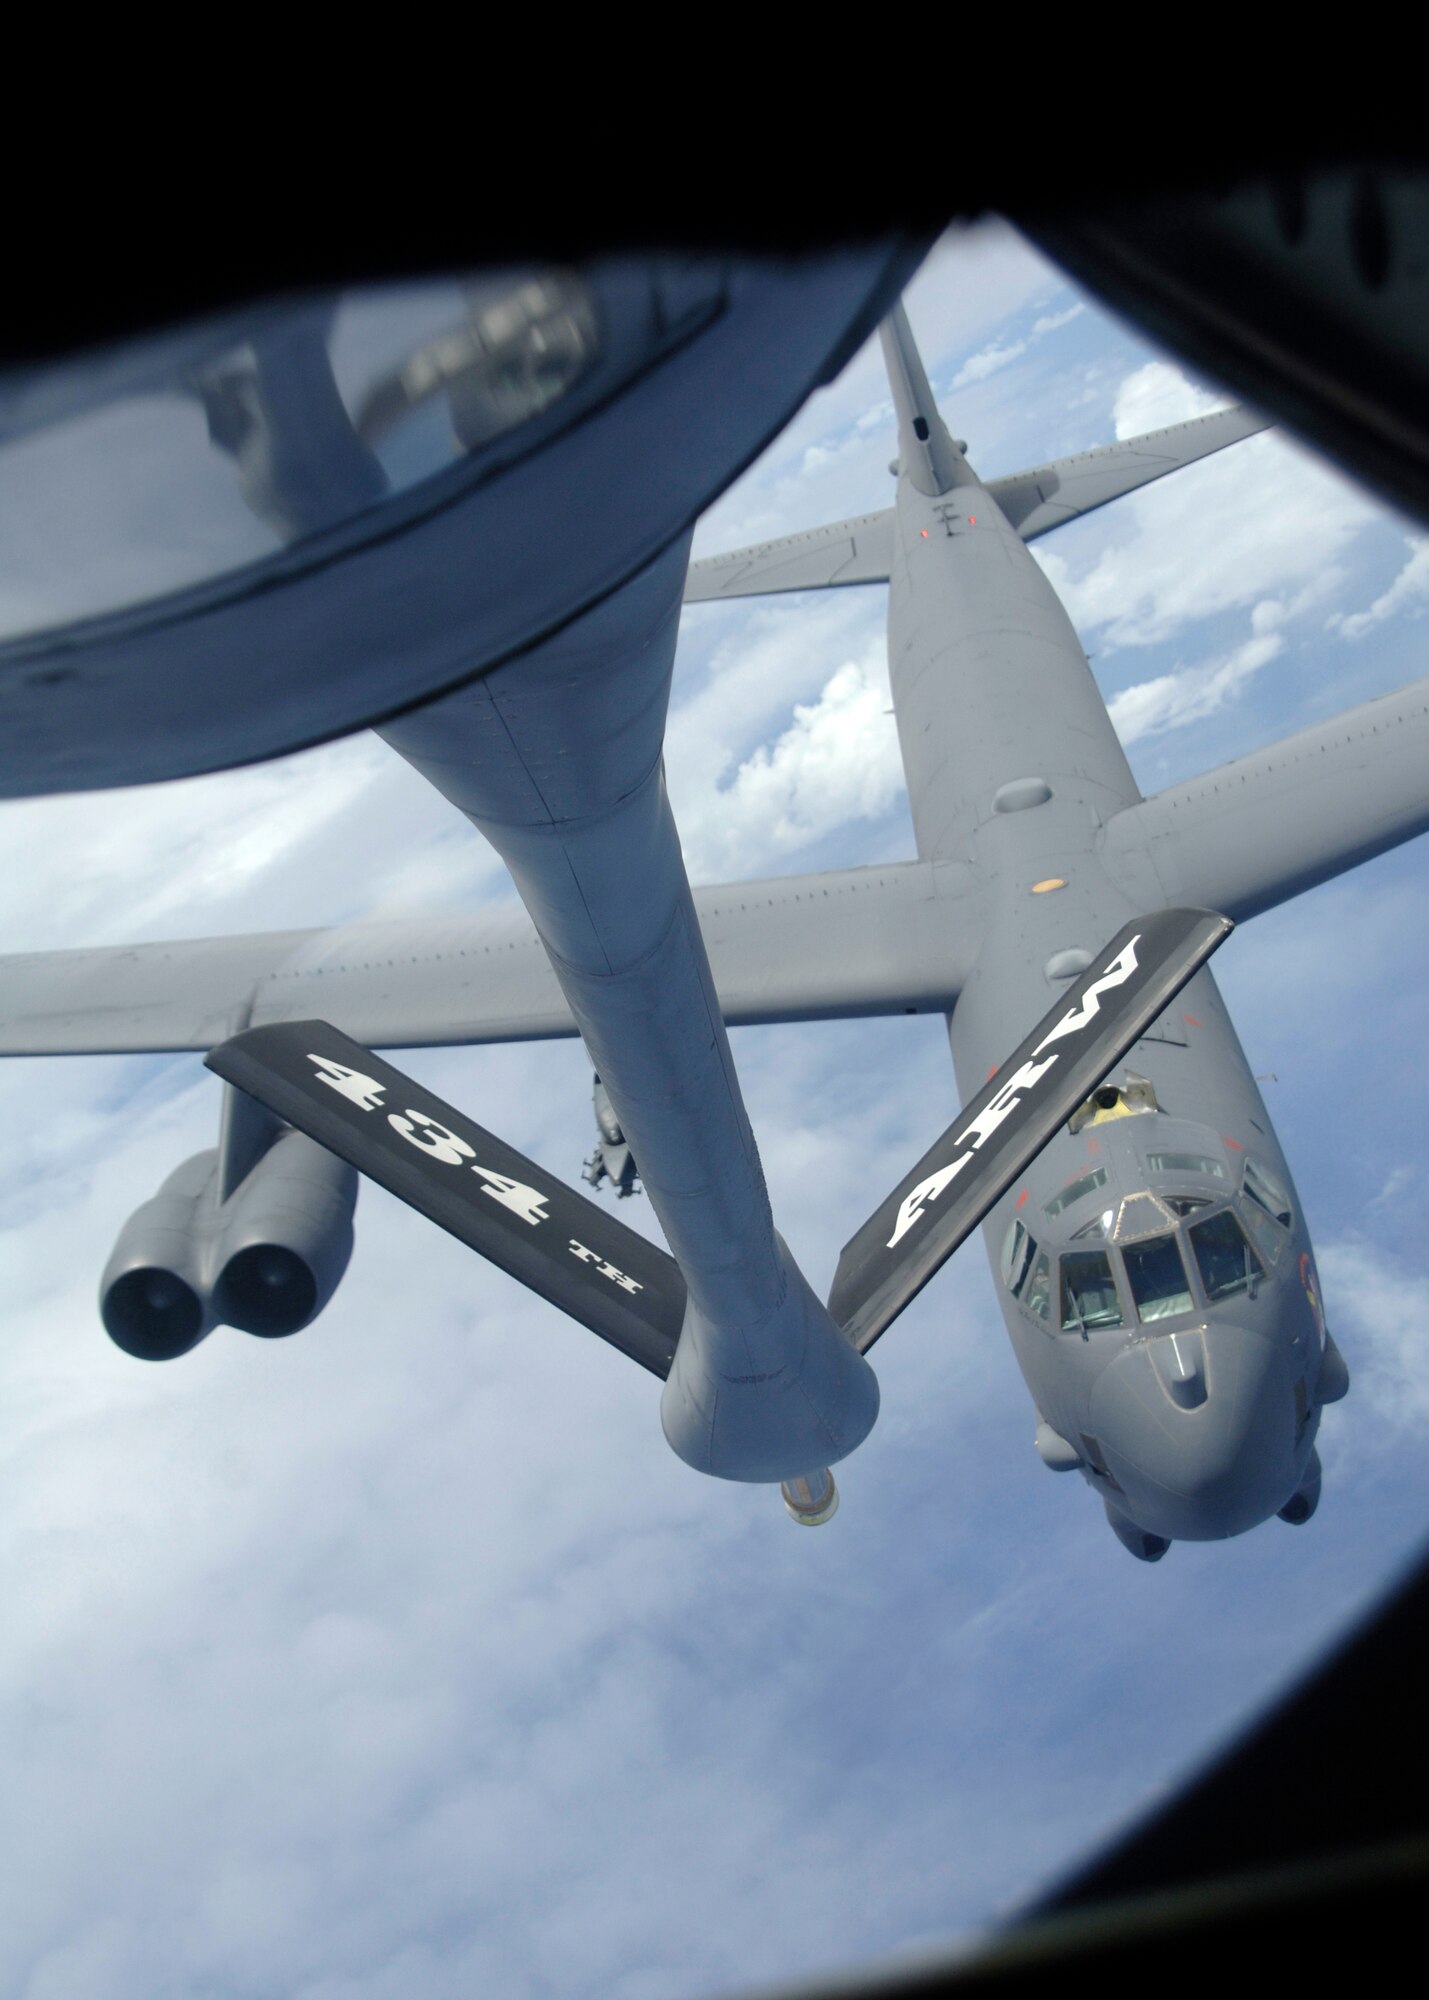 A B-52 from the 23rd Expeditionary Bomb Squadron stabilizes in pre-contact position during a recent air refueling mission near Andersen Air Force Base, Guam.  More than 90,000 pounds of fuel can be delivered via air refueling – a critical component in maintaining the ‘Global Reach’ of the heavy bomber force deployed to the Pacific region. (U.S. Air Force photo by Staff Sgt. Patrick Mitchell)